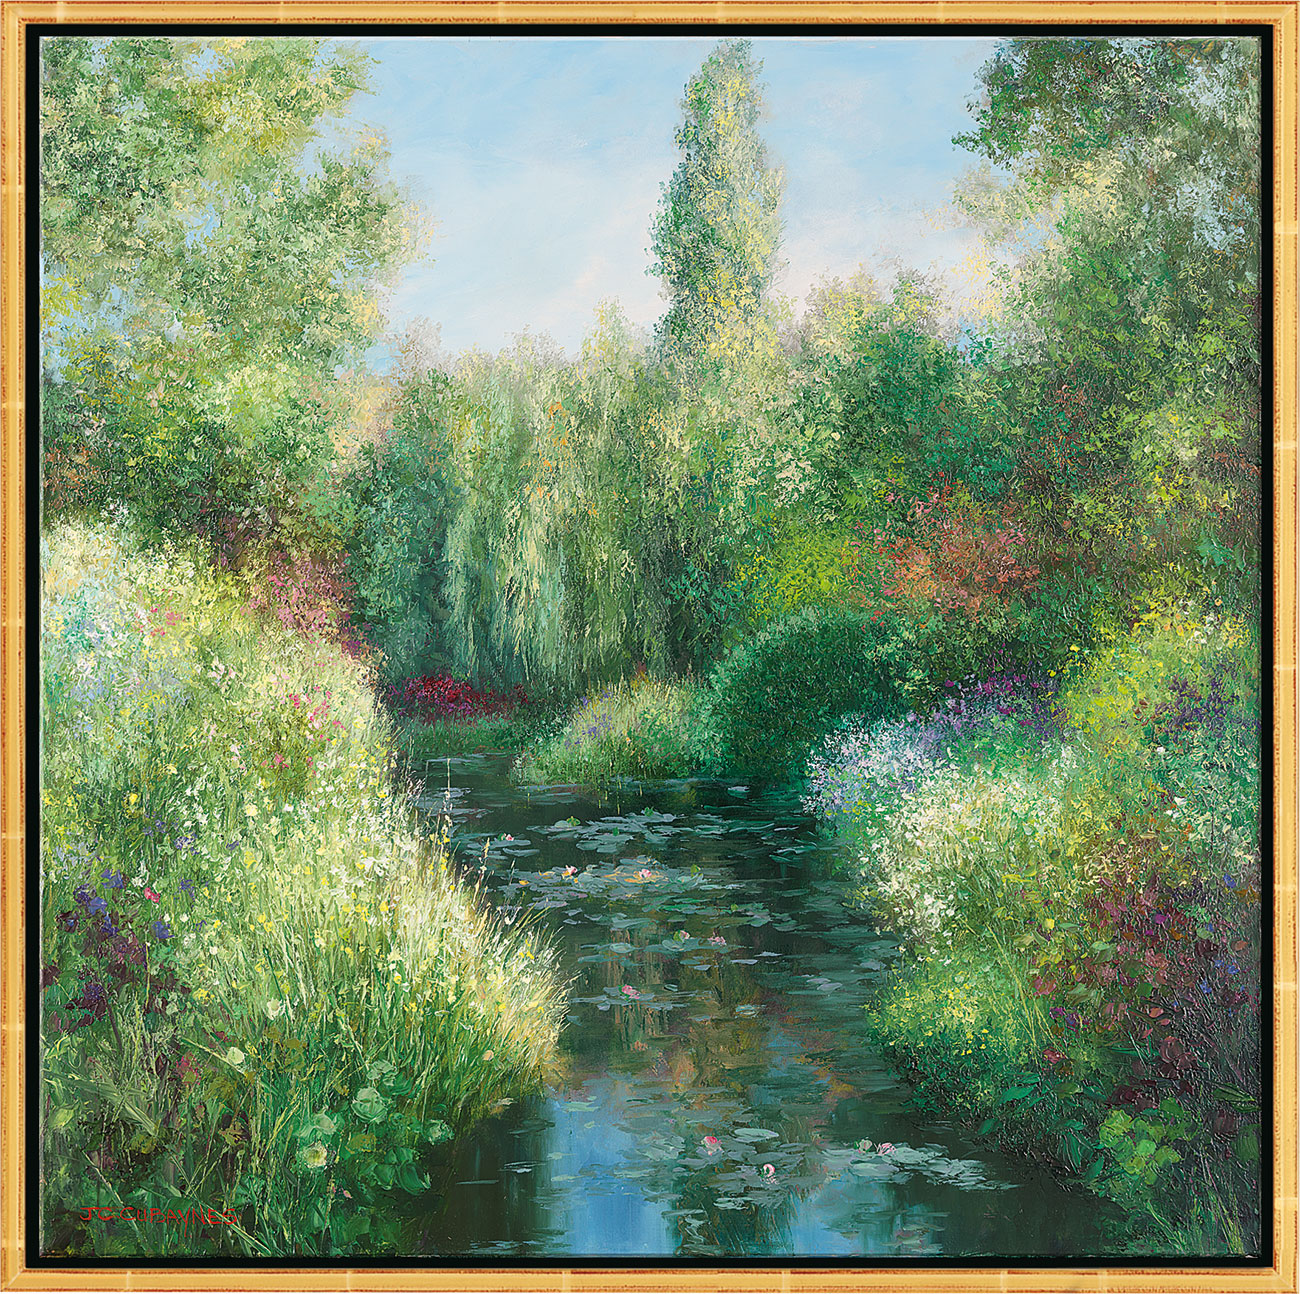 Picture "Juin à Giverny", golden framed version by Jean-Claude Cubaynes